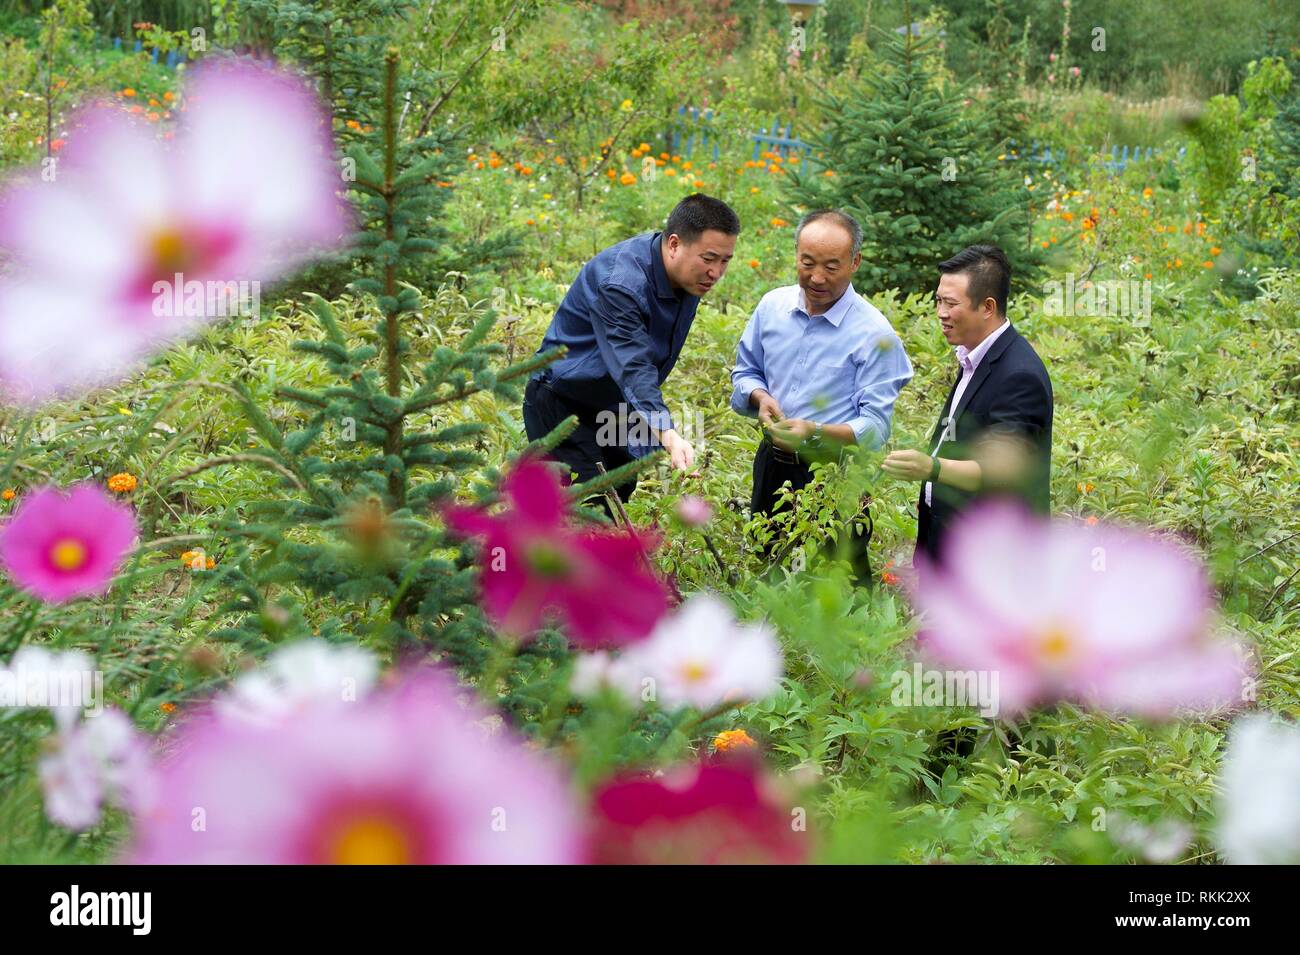 (190212) -- BEIJING, Feb. 12, 2019 (Xinhua) -- An agricultural teacher instructs farmers in planting peony in Longwangba Village of Xiji County in Guyuan, northwest China's Ningxia Hui Autonomous Region, Aug. 30, 2018. China will continue to work vigorously to reduce poverty and lift no less than ten million people out of poverty in 2019, to lay a solid foundation for winning the battle against poverty, the State Council's executive meeting chaired by Premier Li Keqiang decided on Monday. The year 2018 saw China launch its three-year actions in fighting the battle against poverty. Premier L Stock Photo